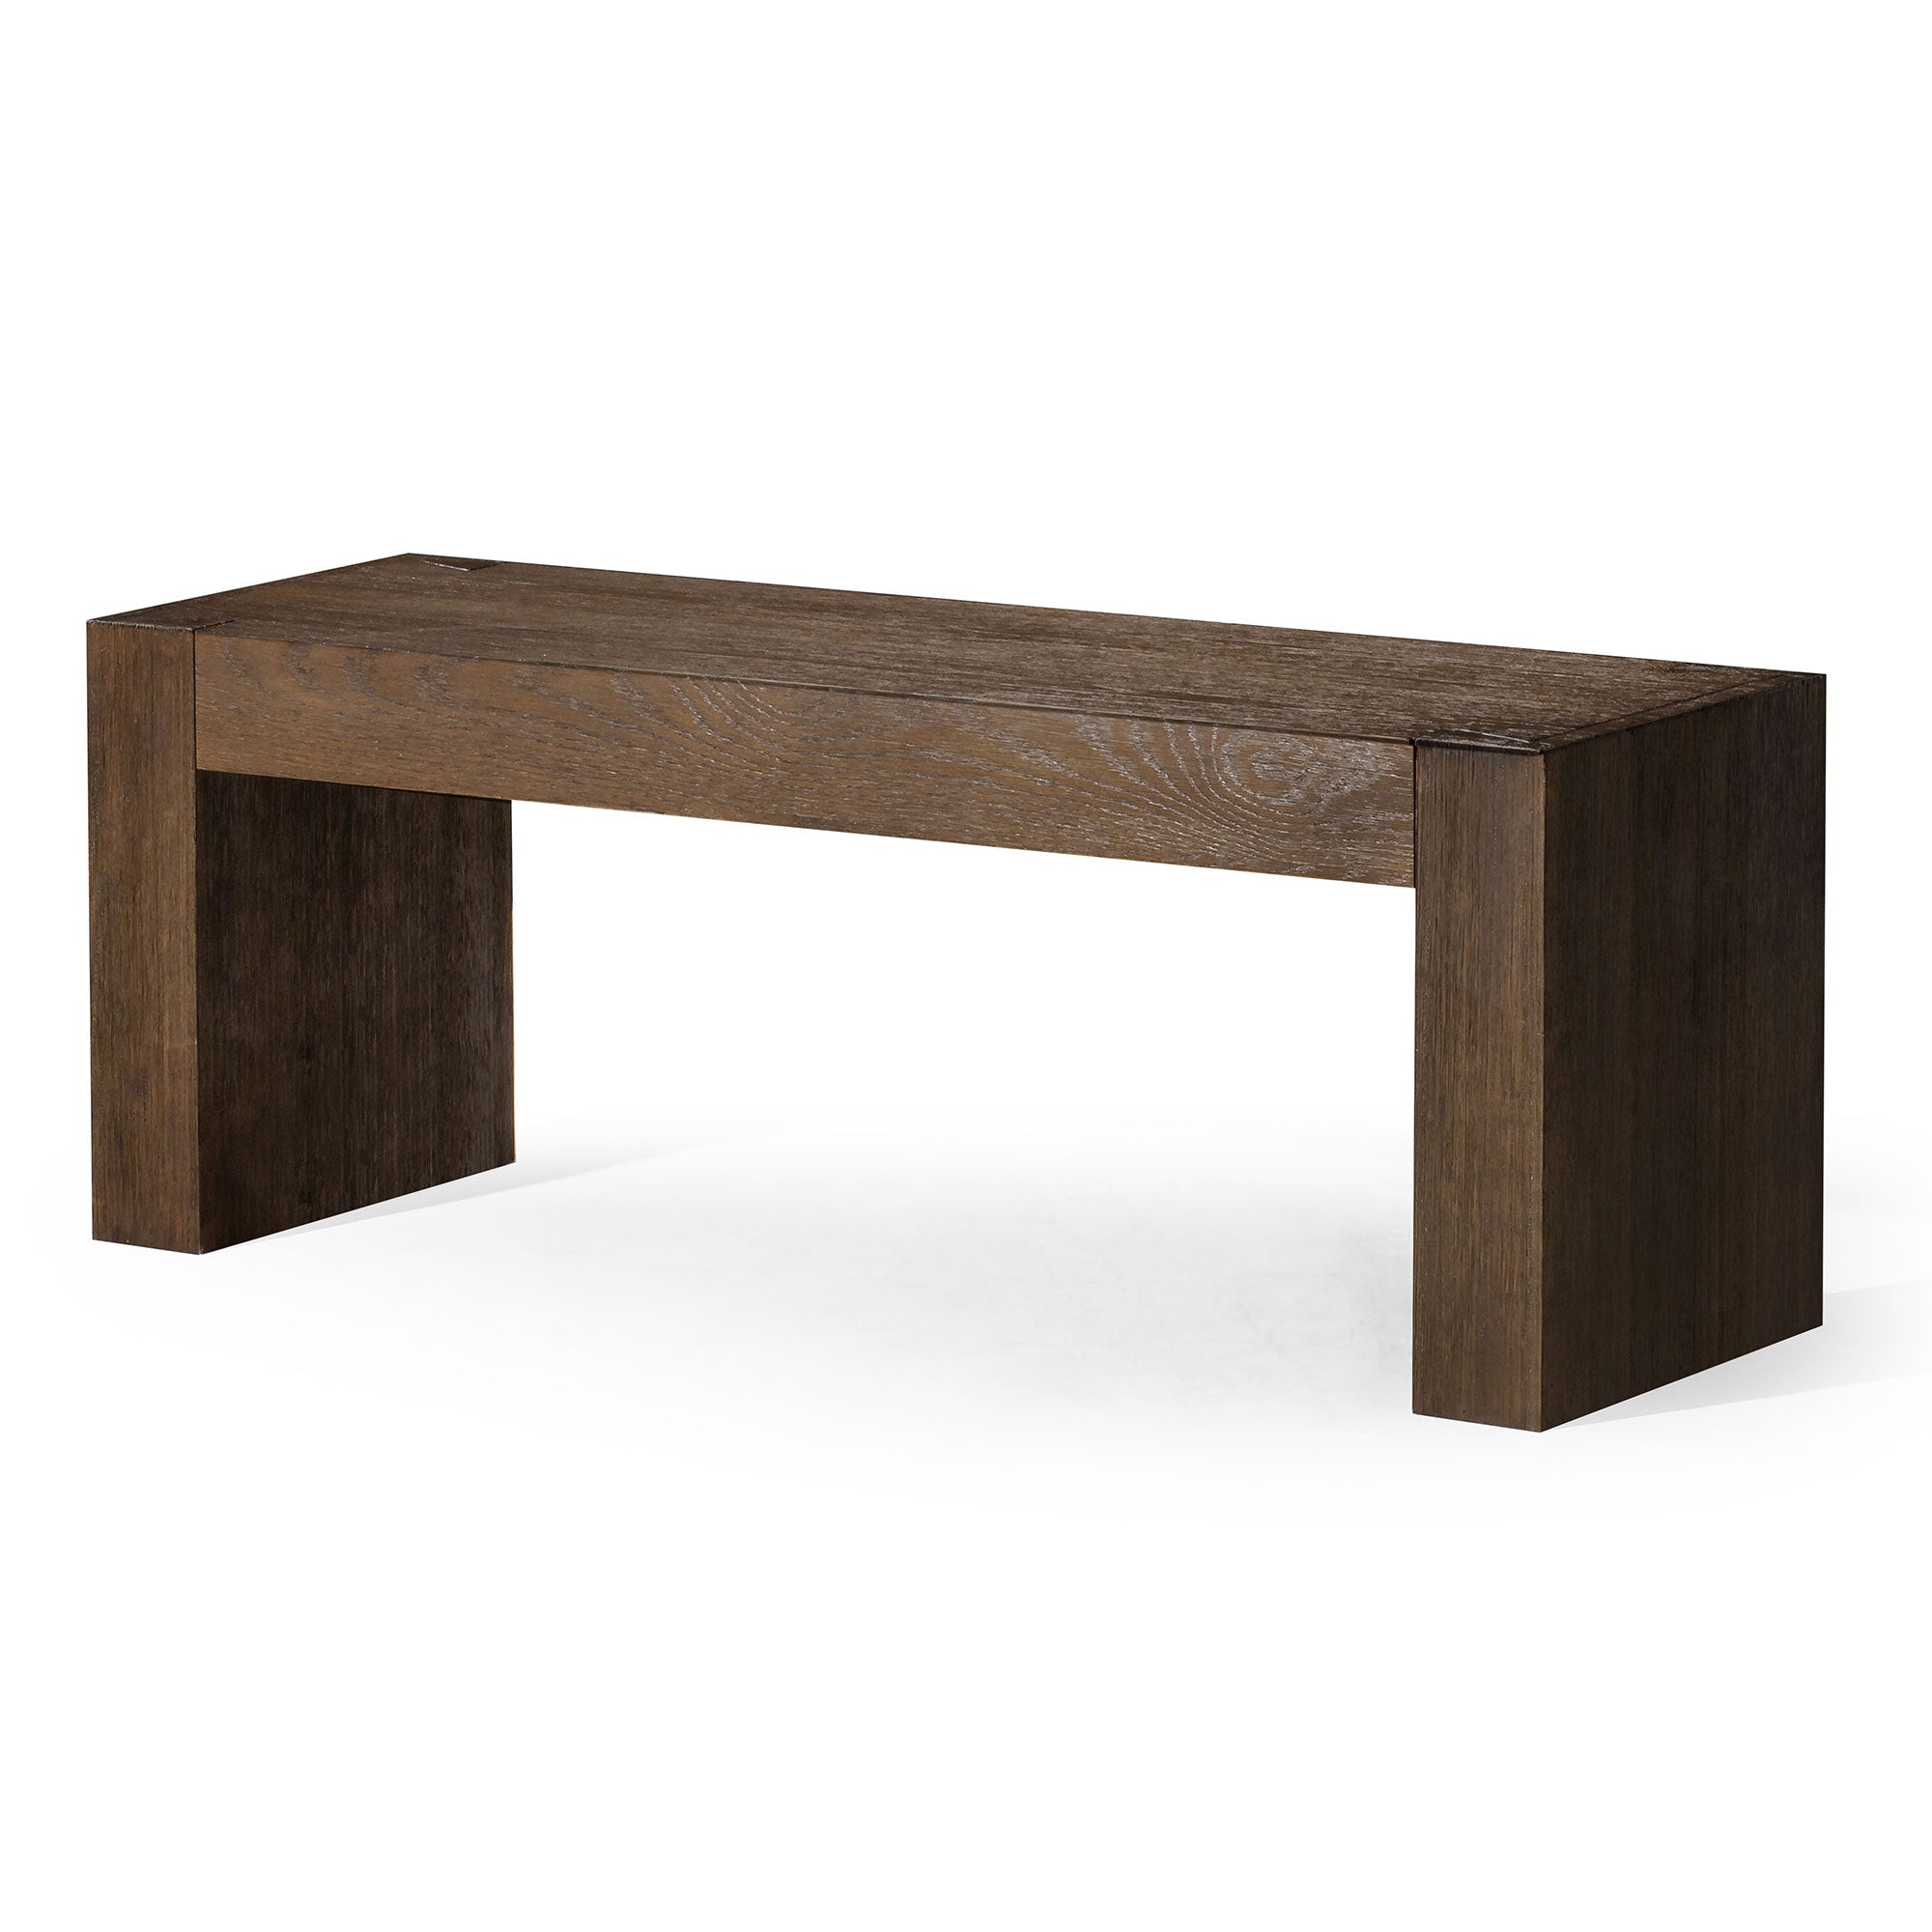 Zeno Organic Wooden Bench in Weathered Brown Finish in Ottomans & Benches by Maven Lane